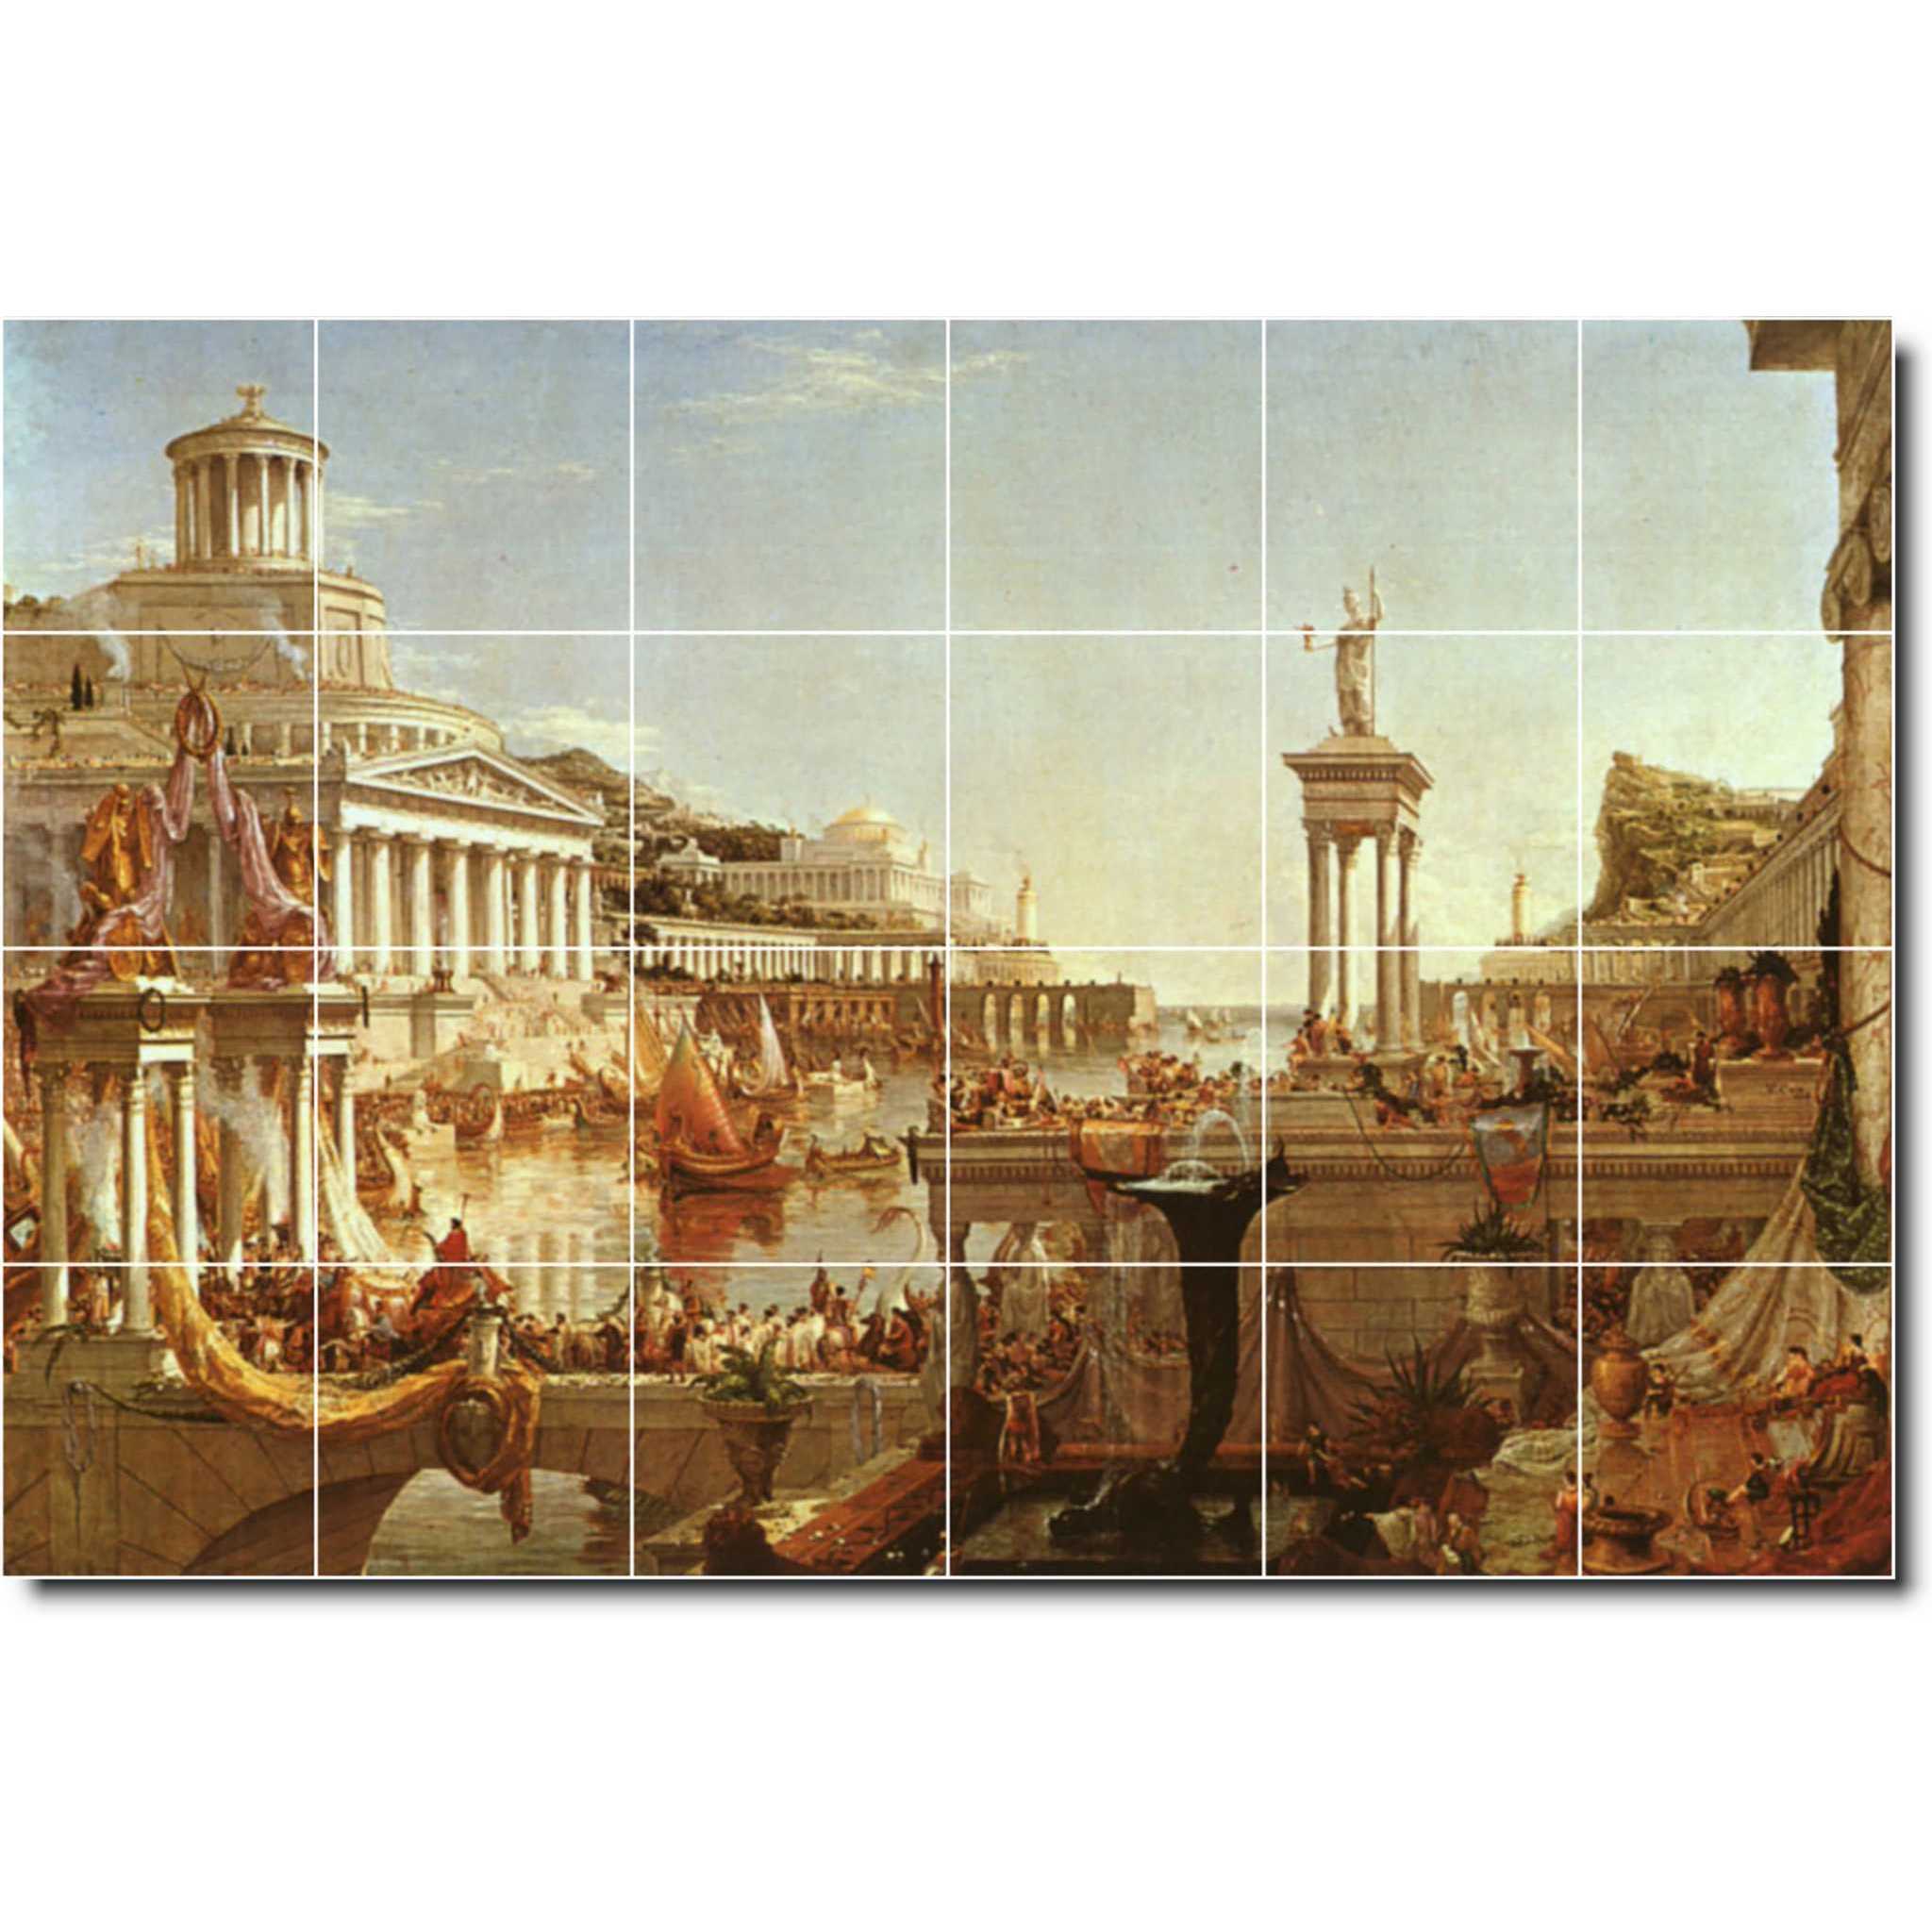 thomas cole historical painting ceramic tile mural p01870